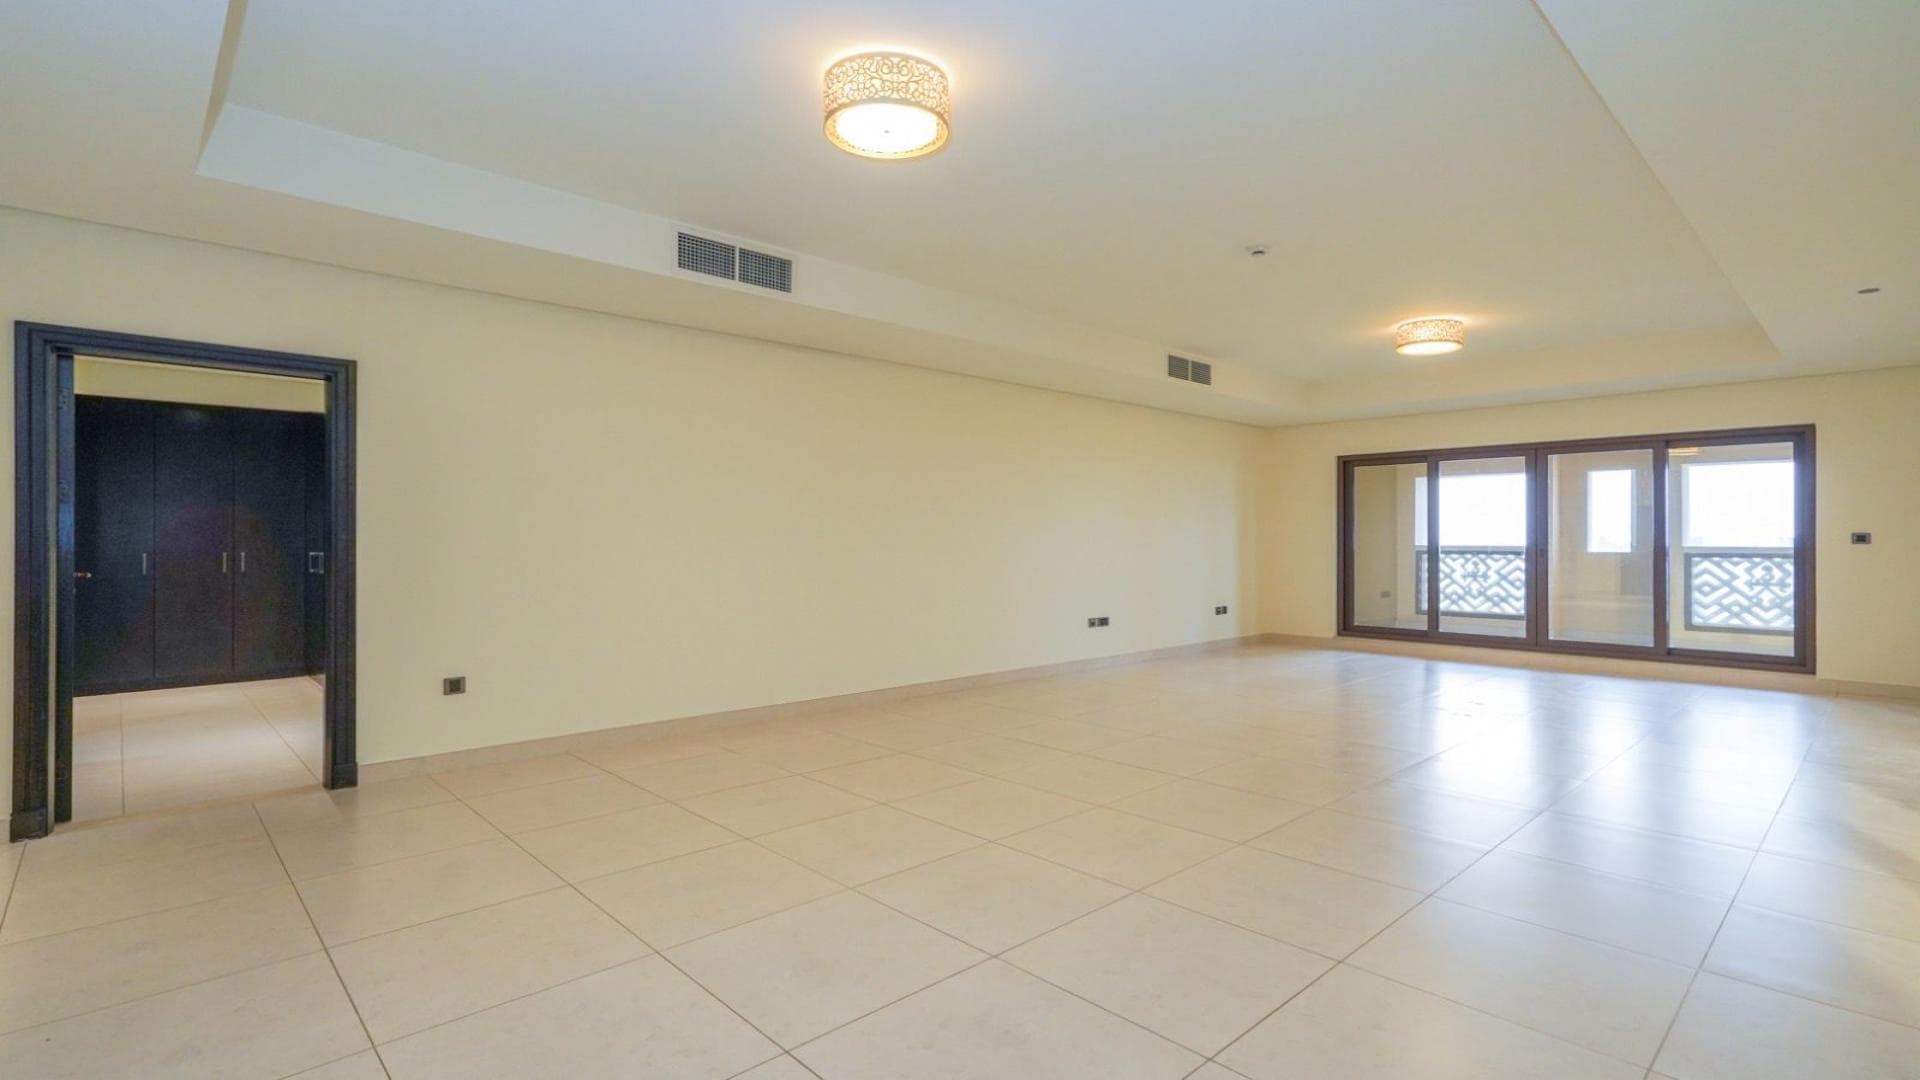 3 Bedroom Apartment For Sale Grand Residence Lp38241 Ca6ac900d650480.jpeg